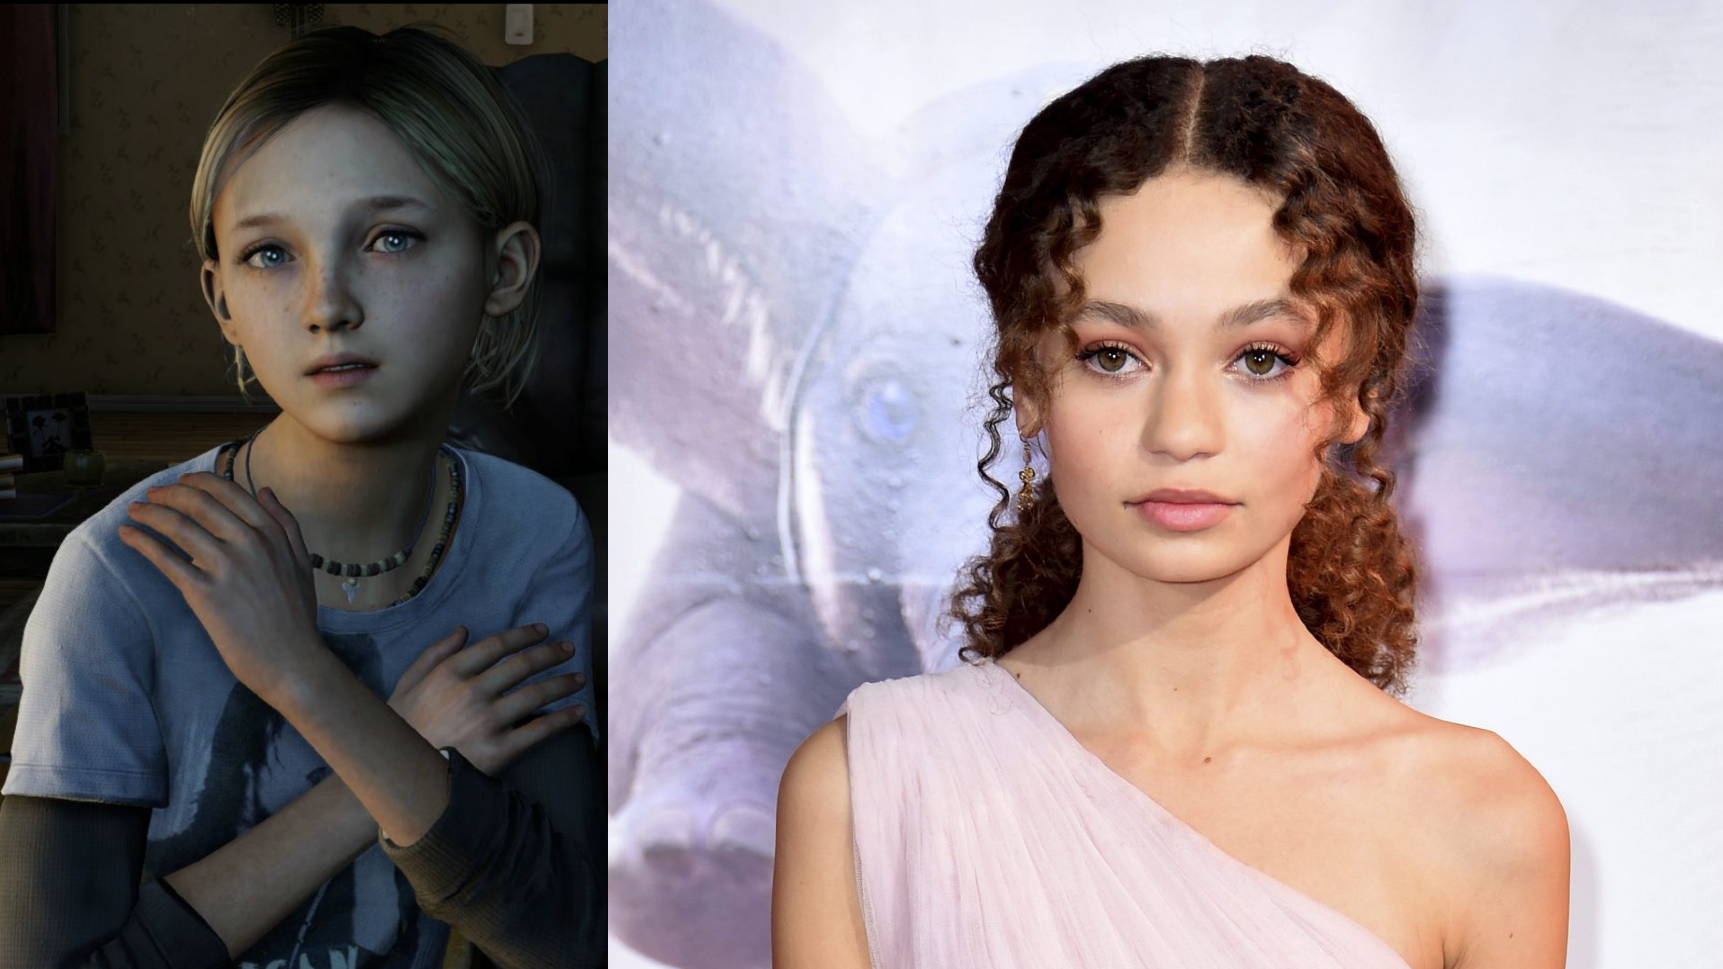 The Last of Us HBO TV Series Has Cast Nico Parker as Sarah, Joel's Daughter